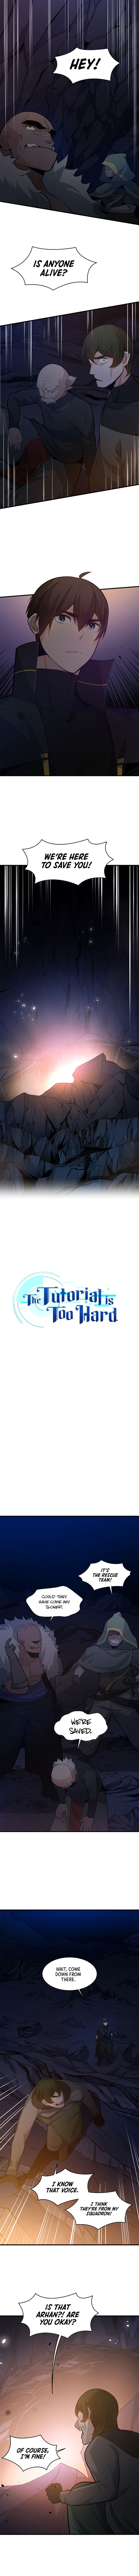 The Tutorial is Too Hard chapter 103